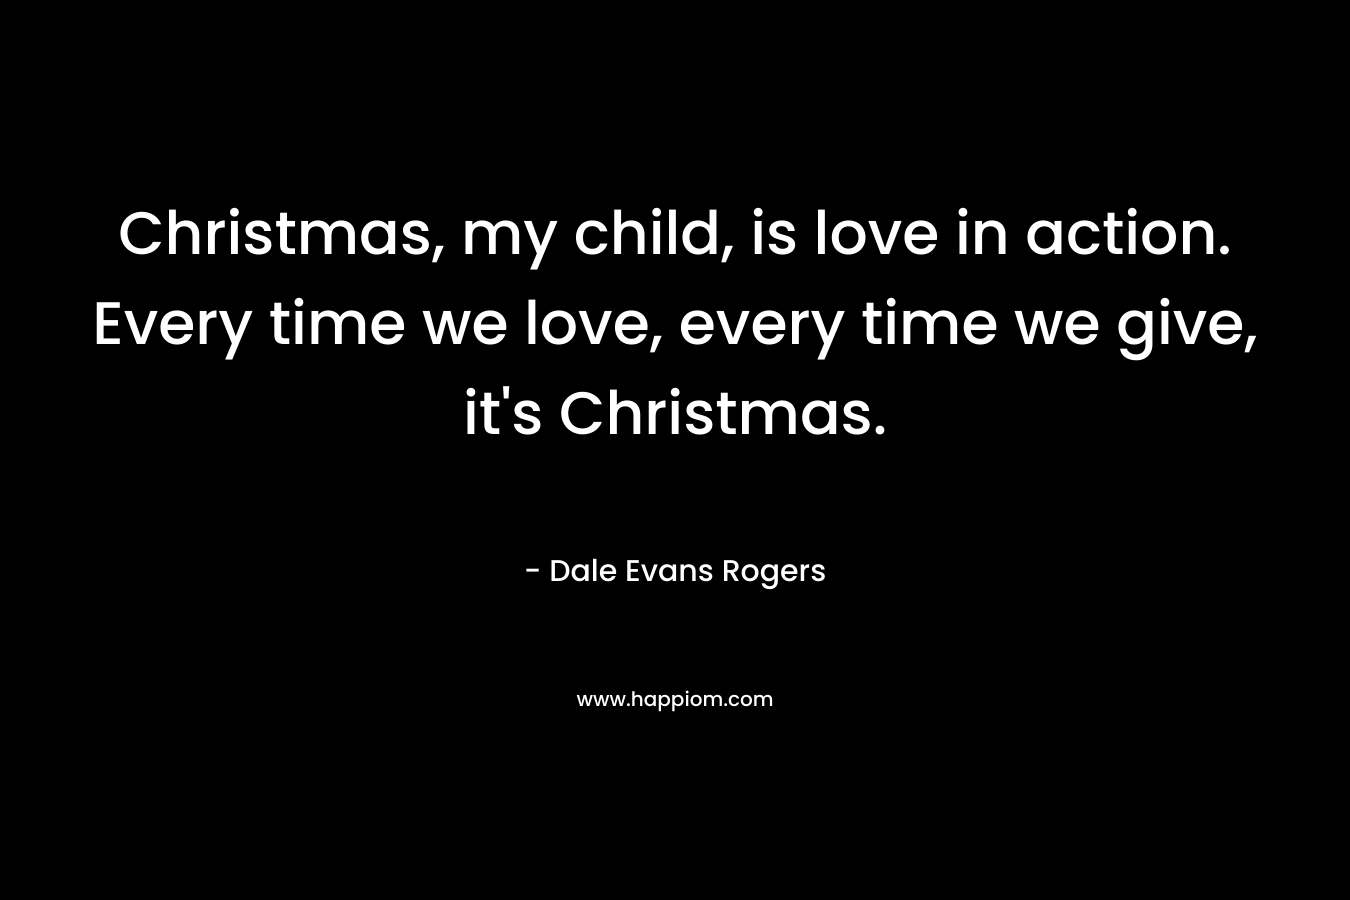 Christmas, my child, is love in action. Every time we love, every time we give, it’s Christmas. – Dale Evans Rogers